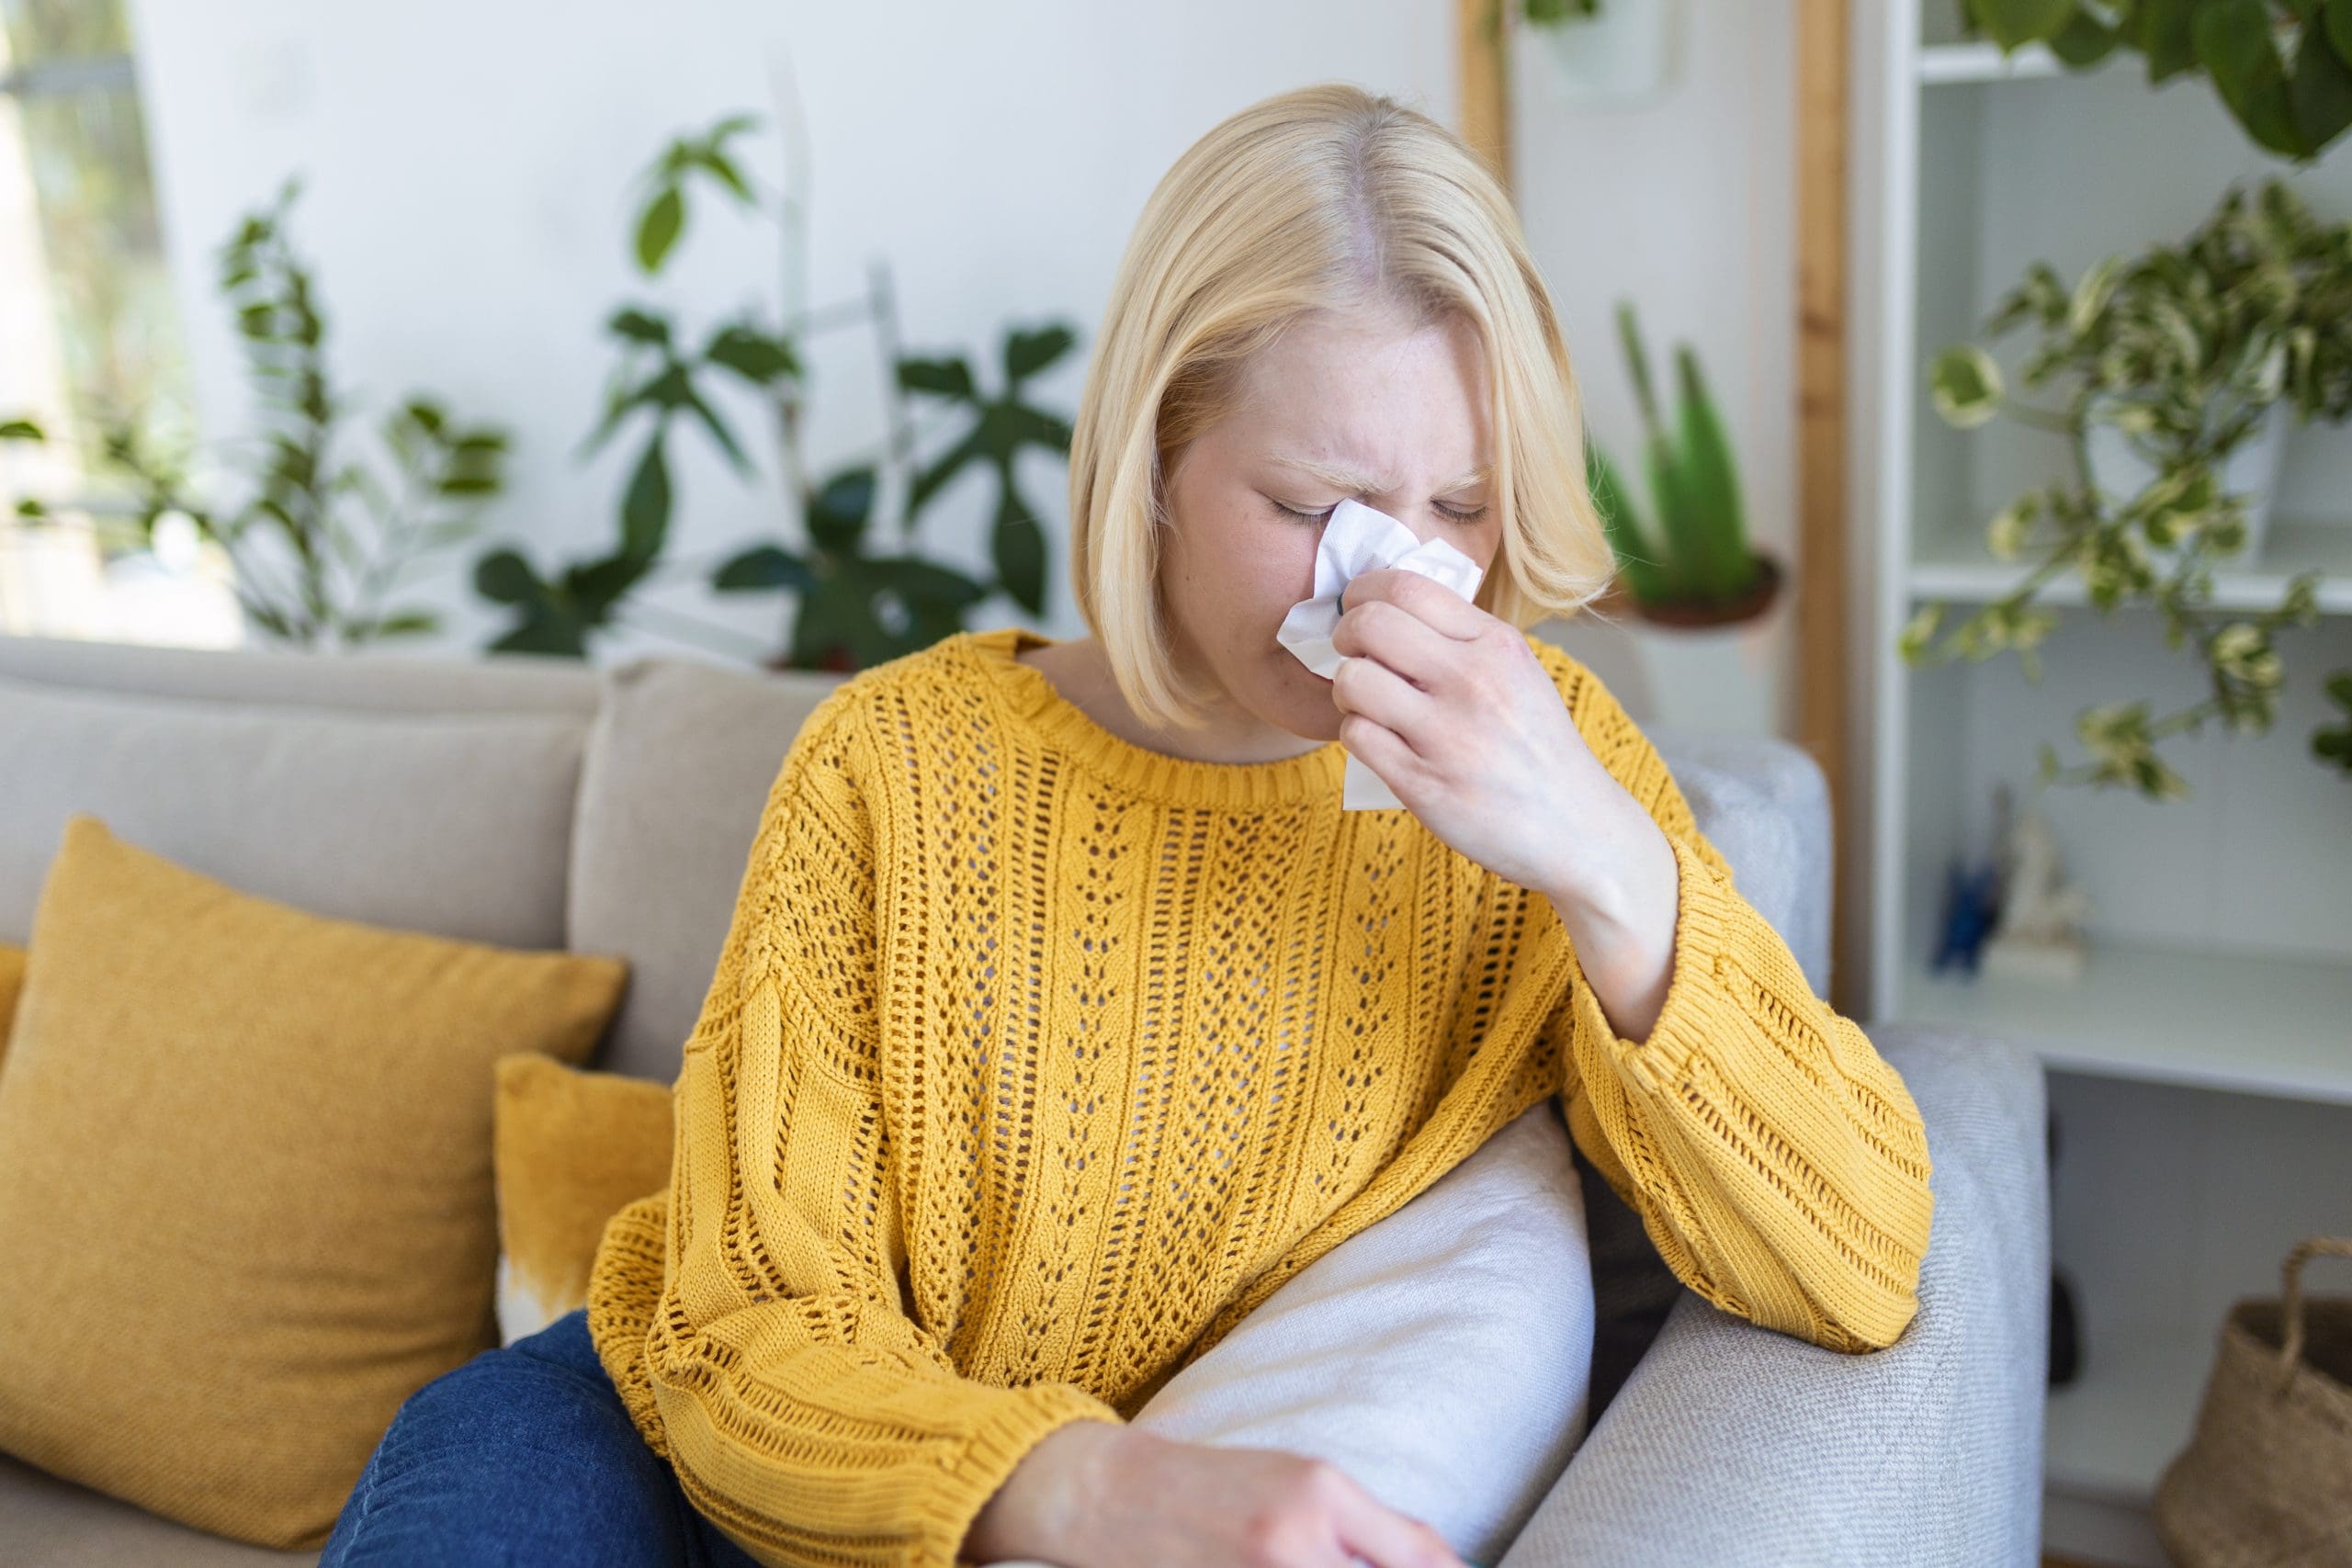 woman sneezing on couch because of allergens in home wanting to build and maintain a hypoallergenic home